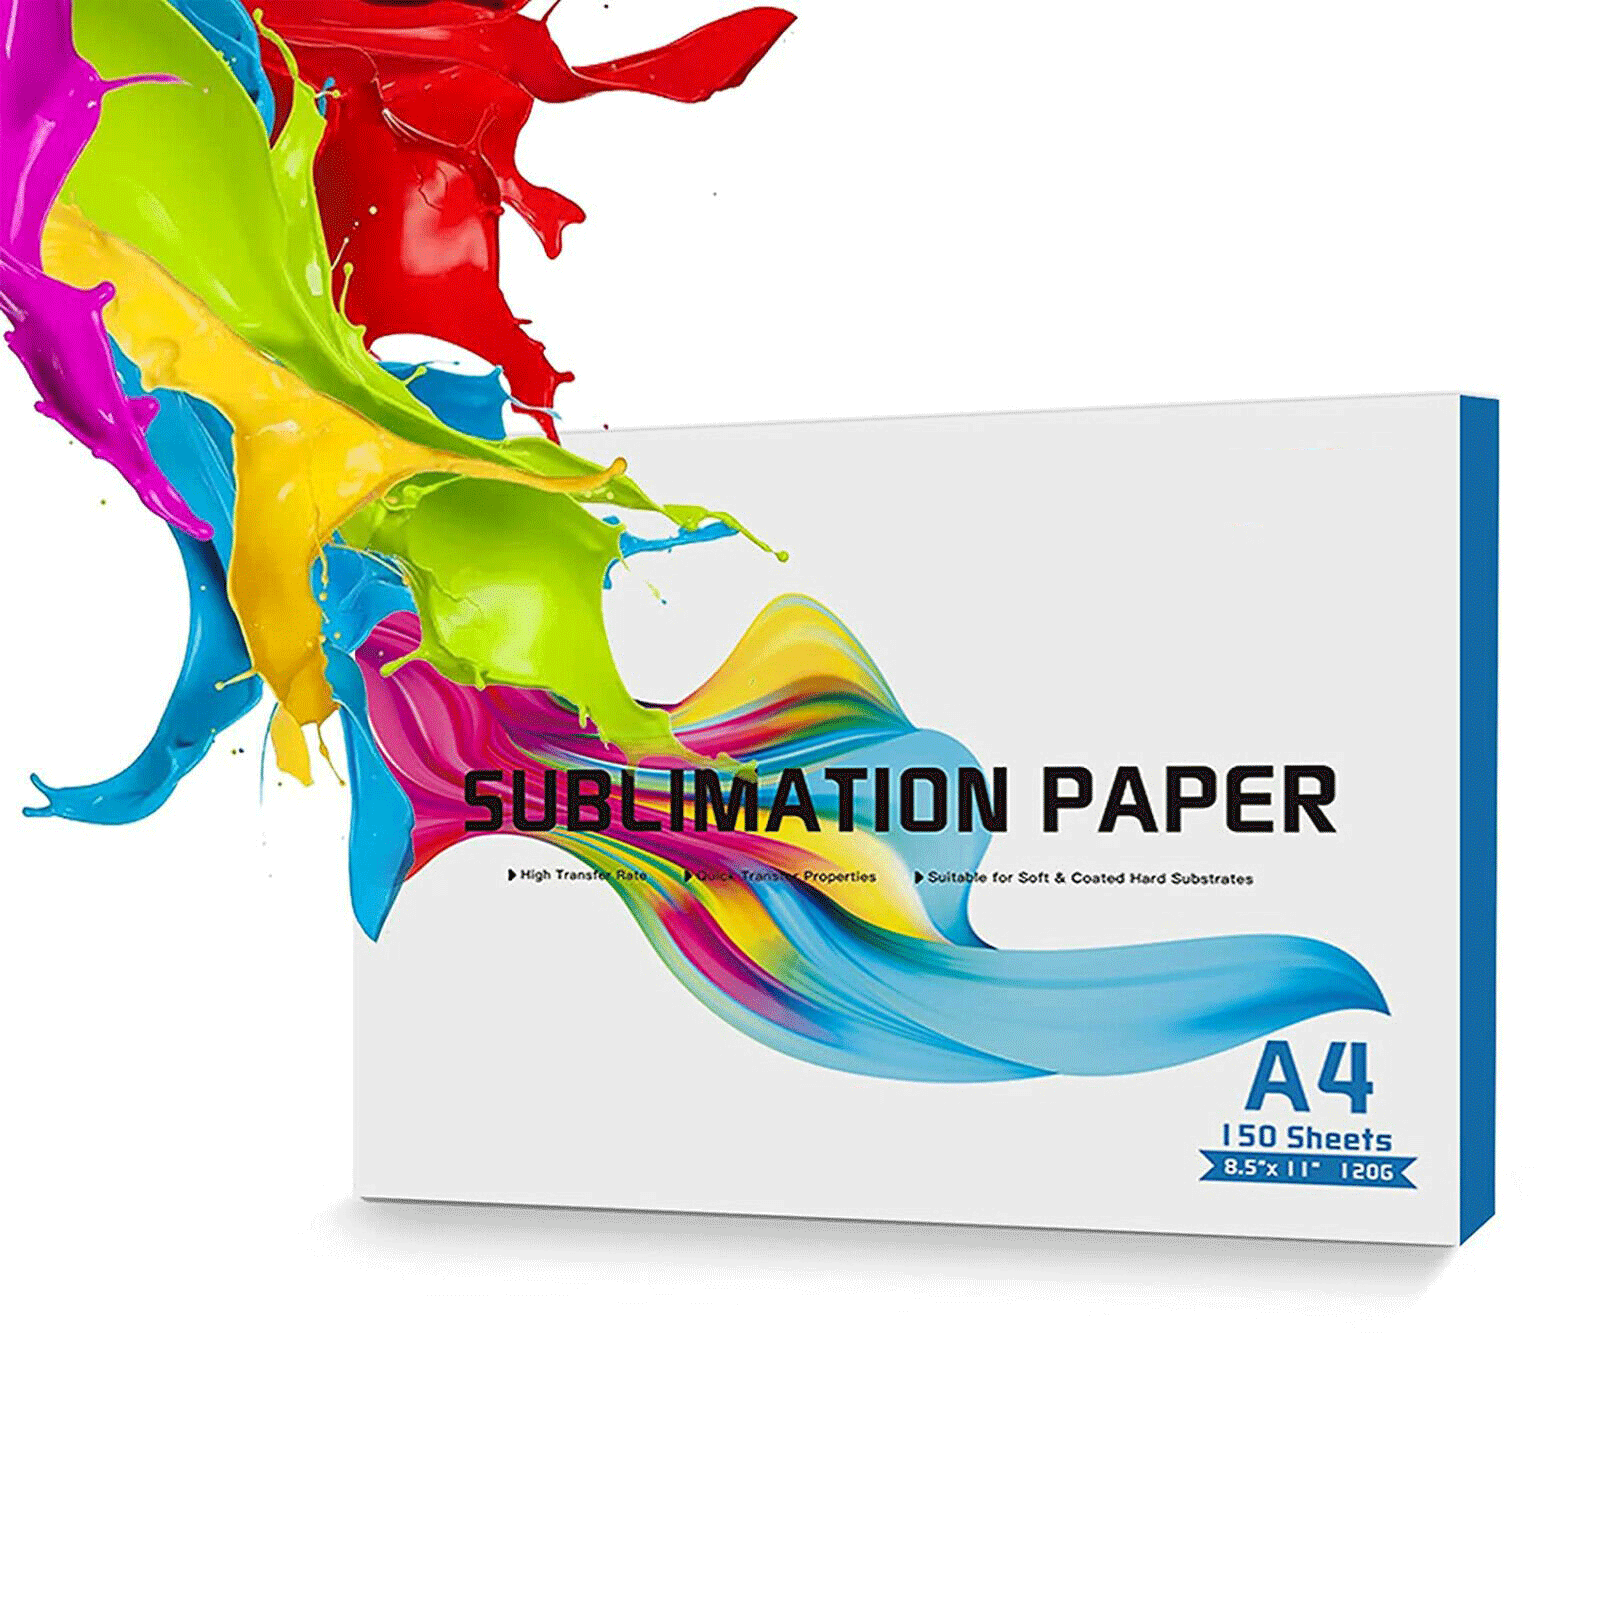 A-SUB Sublimation Paper Heat Transfer 110 Sheets 8.5 x 11 Inches Letter  Size Compatible with Inkjet Printer 120gsm